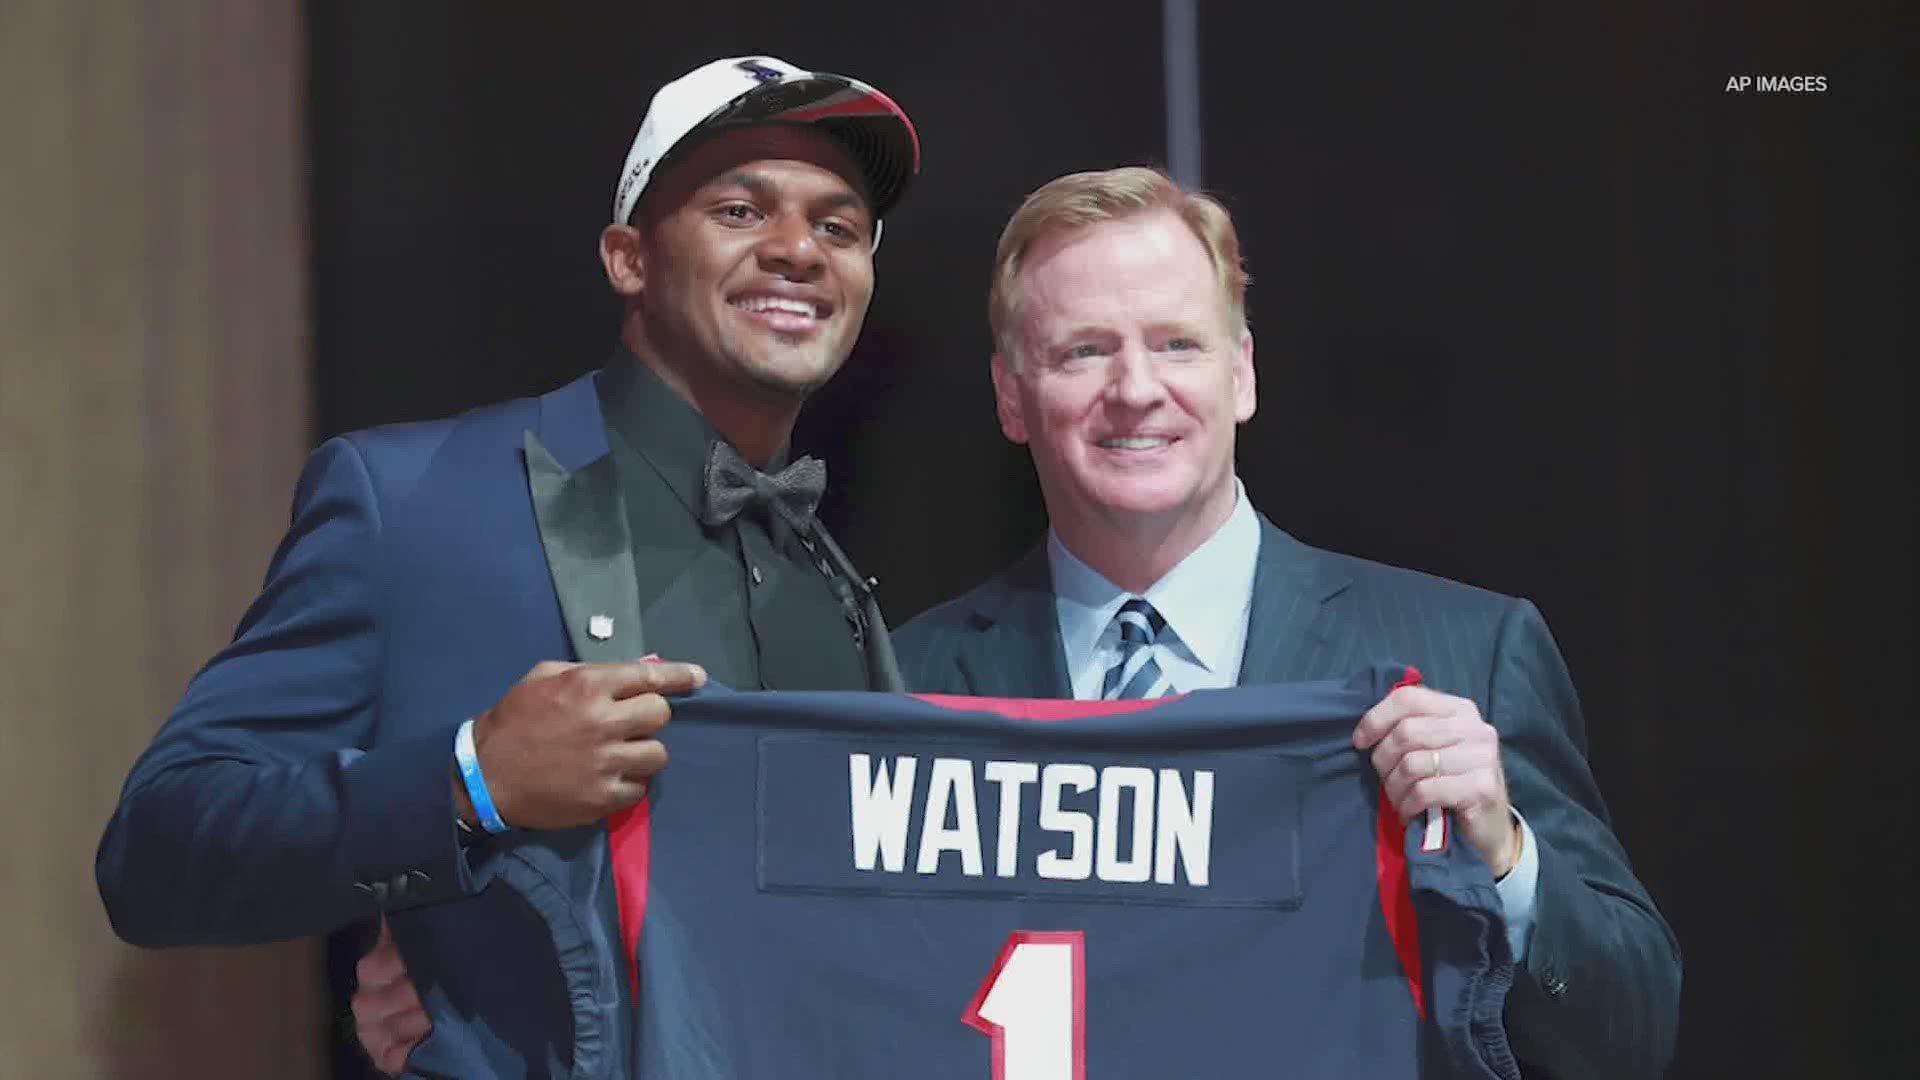 The Texans drafted QB Deshaun Watson back in 2017. Now the star player is looking to be traded.